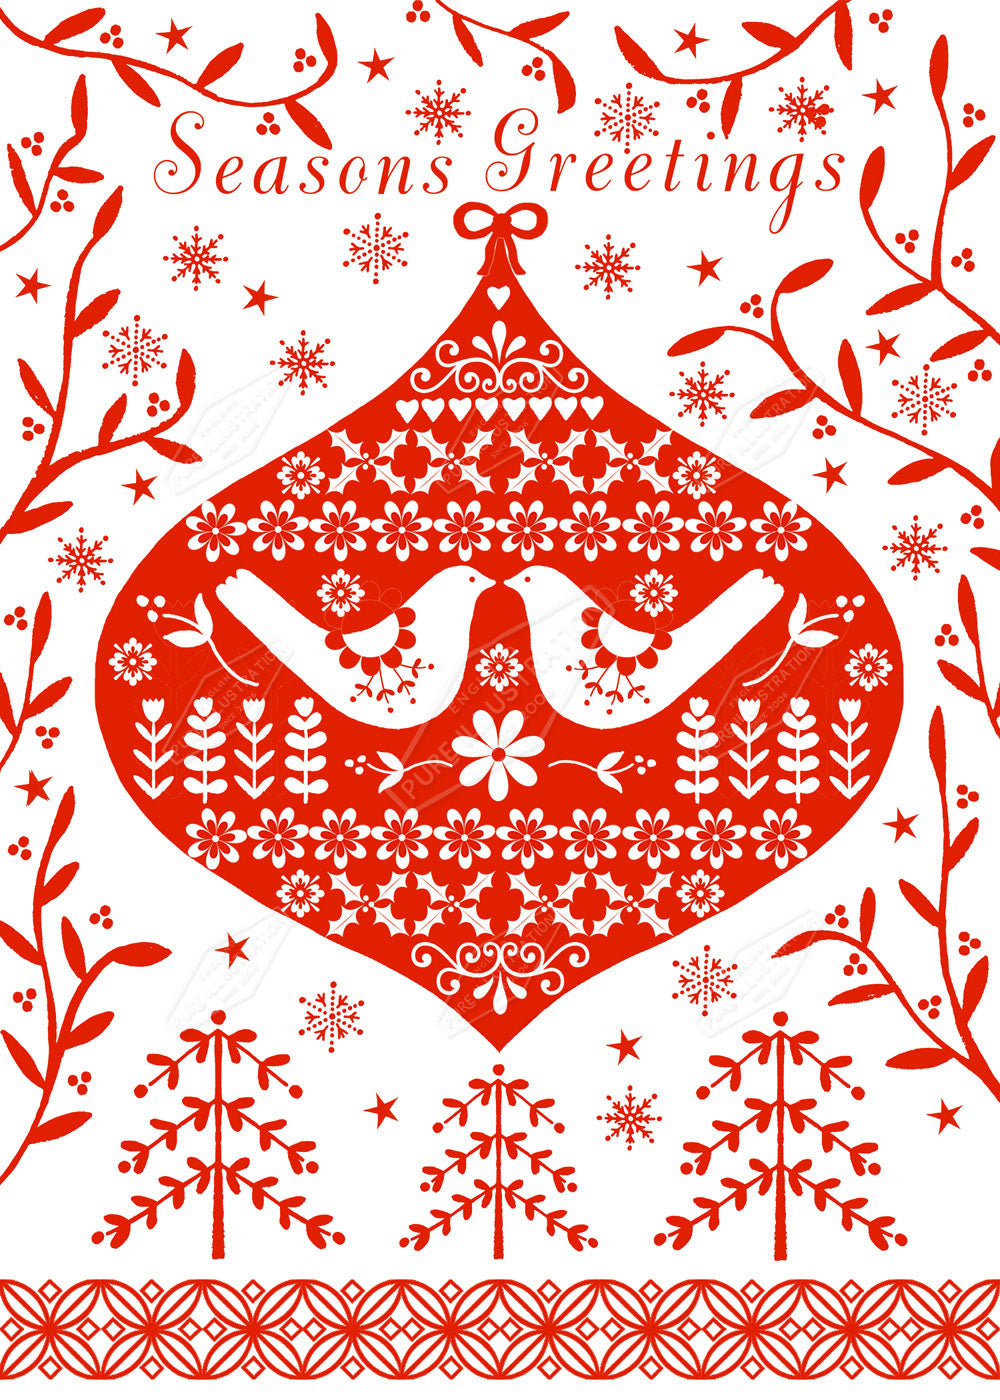 00021886SSNa- Sian Summerhayes is represented by Pure Art Licensing Agency - Christmas Greeting Card Design